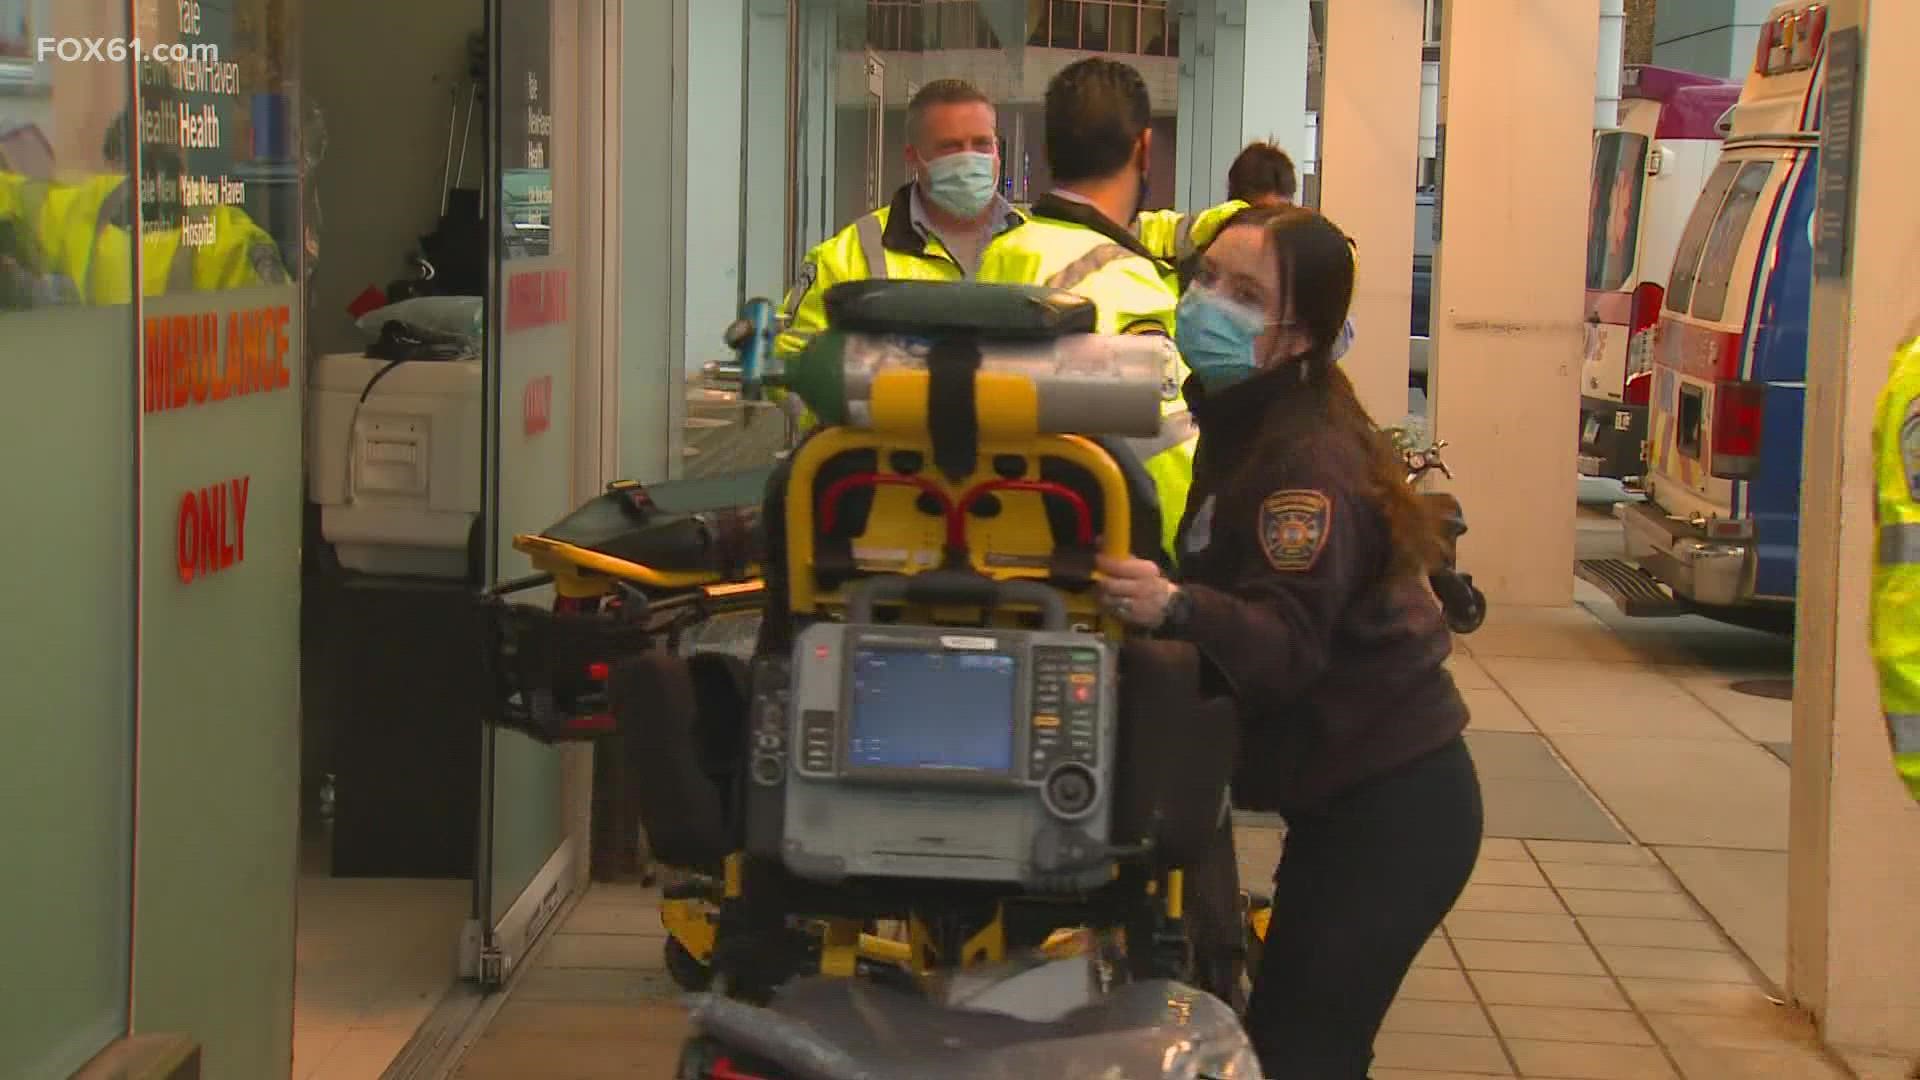 Some hospitals are short on beds, and all of them are short on staff. FOX61 checks in with local health care workers.